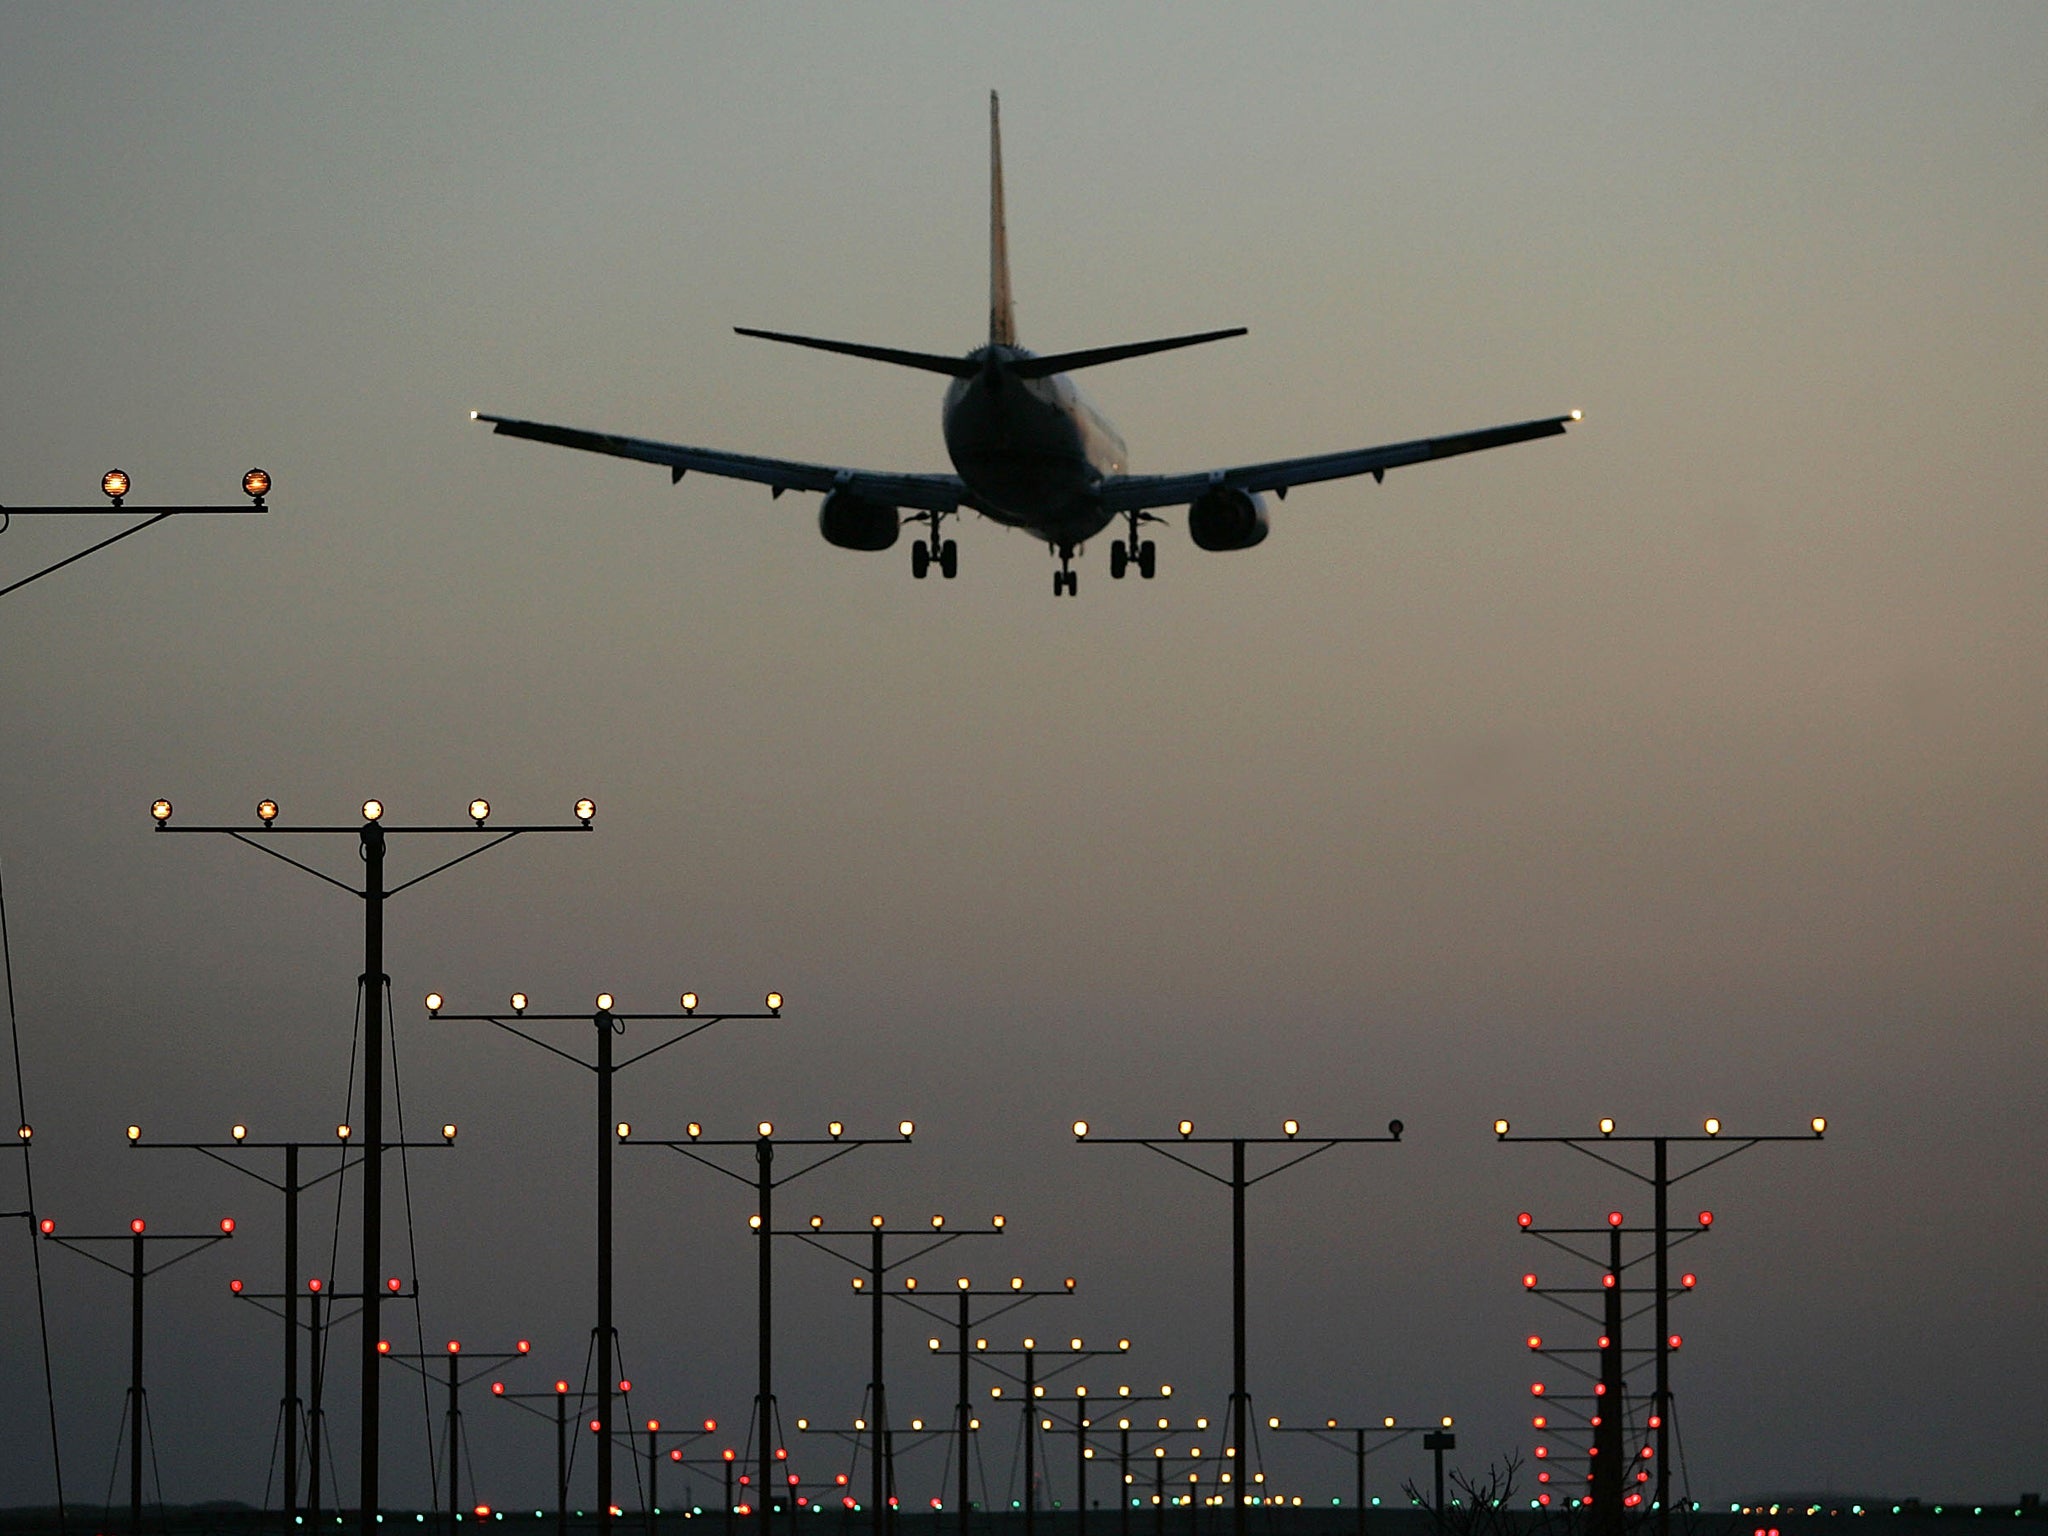 A 22 per cent surge in air fares helped lift inflation higher than expected last month